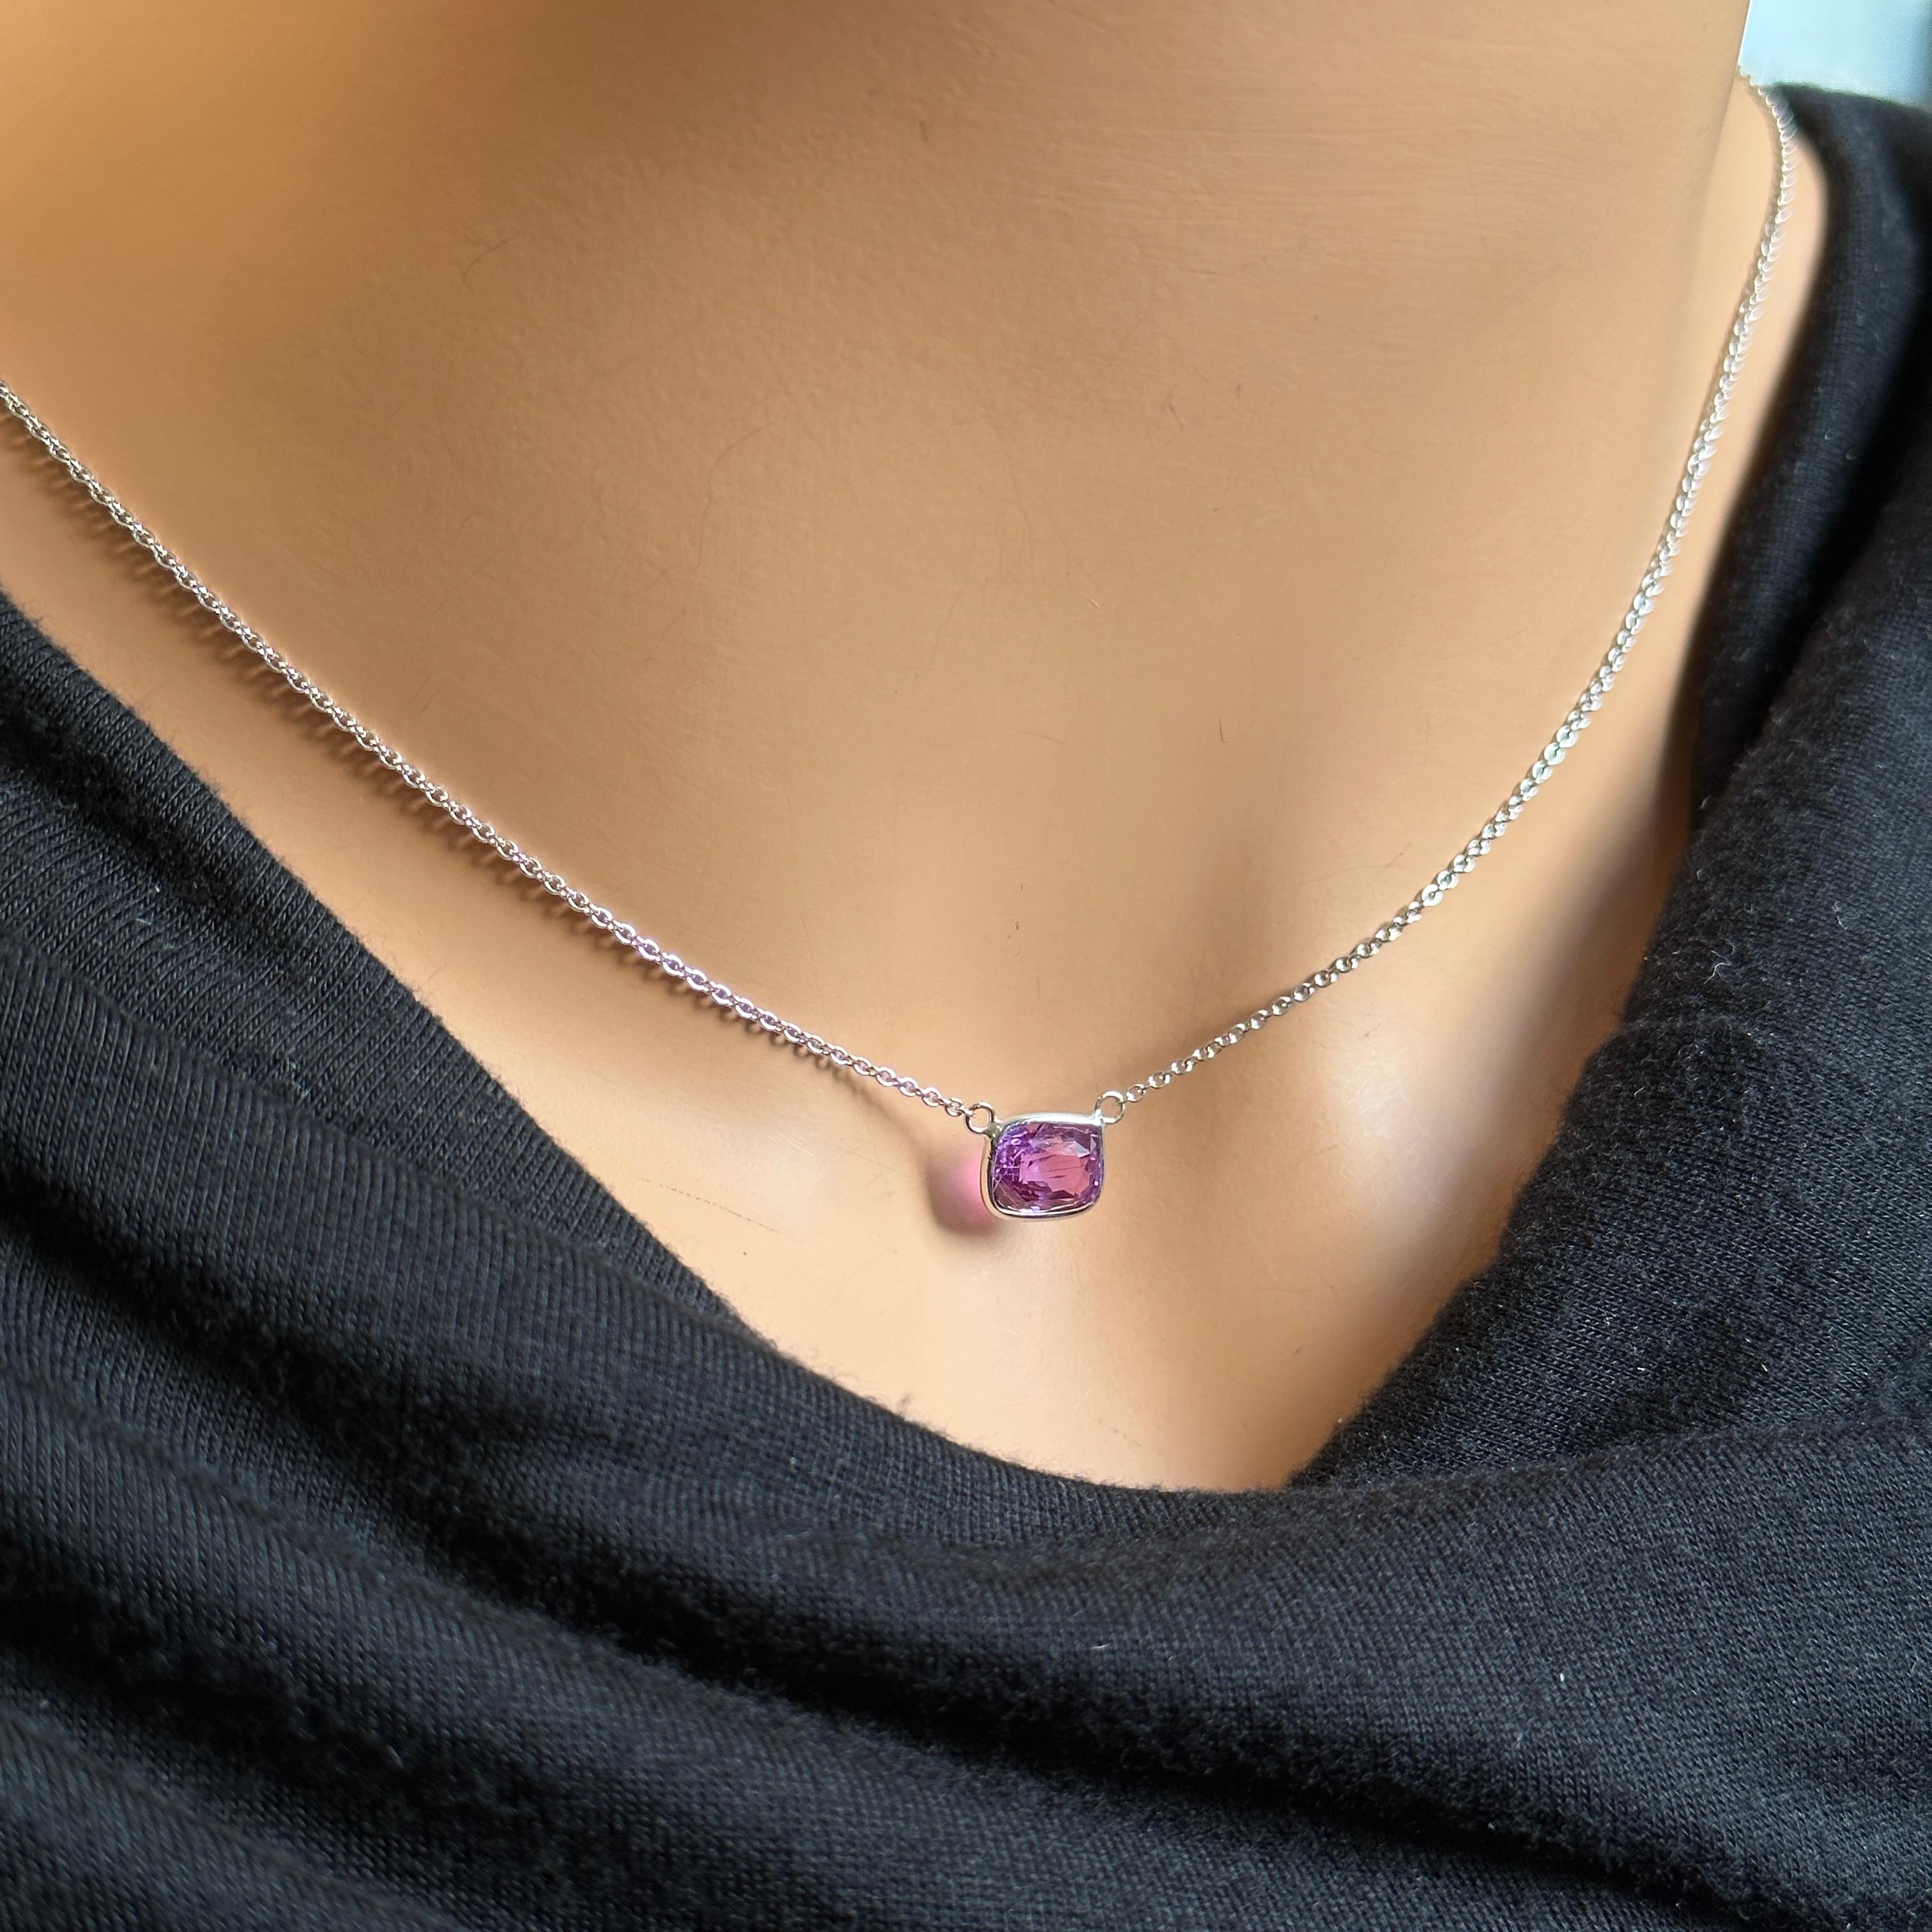 Contemporary 1.93ct Certified Purple Sapphire Cushion Cut Solitaire Necklace in 14k in WG For Sale